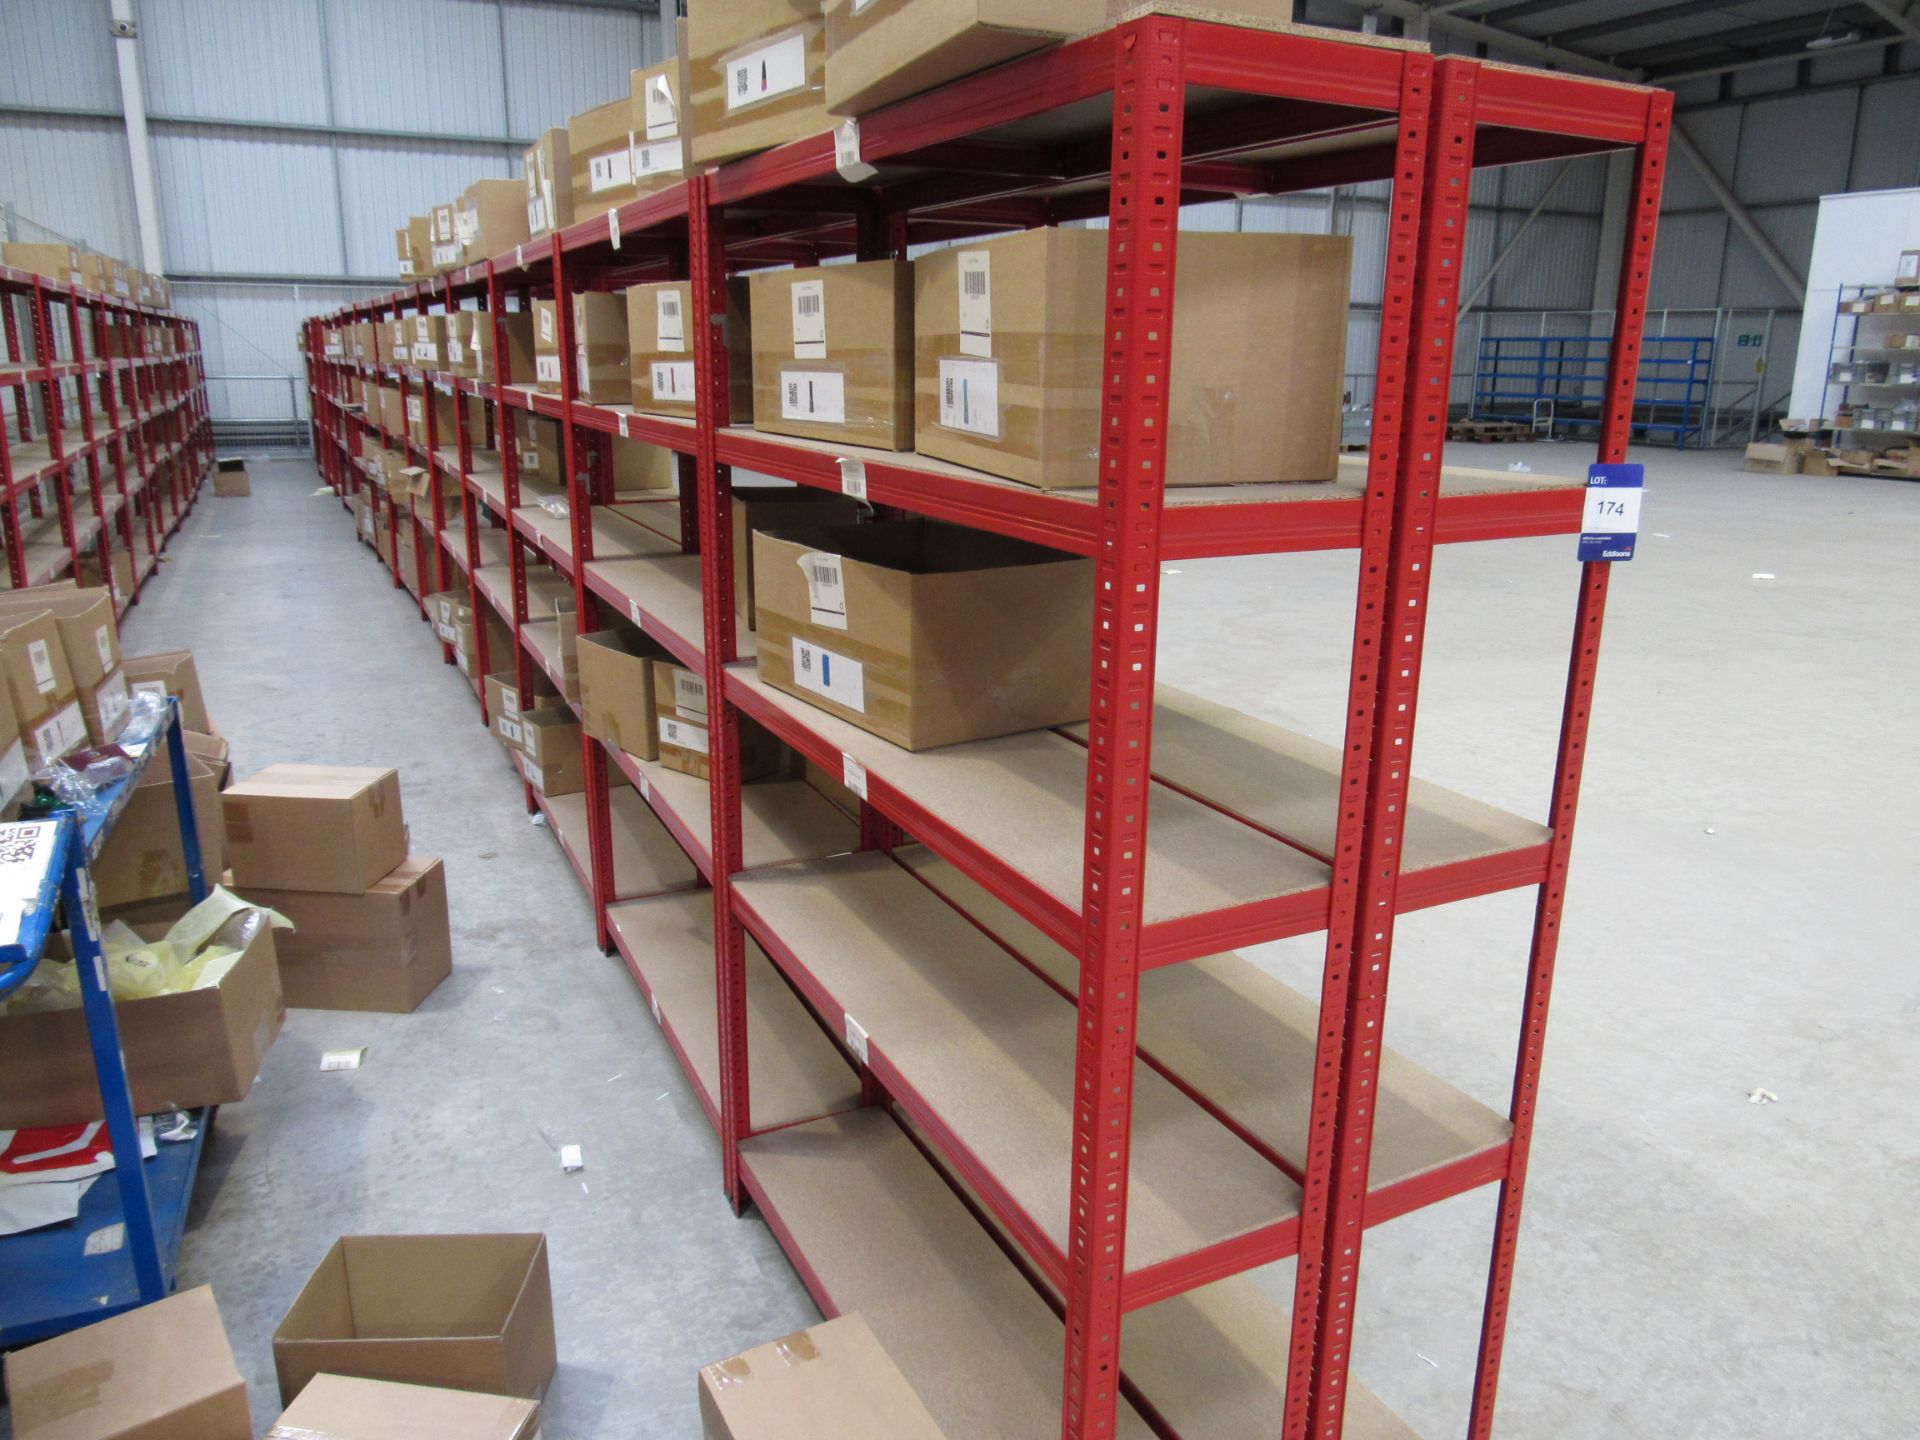 21 Bays Boltless Racking, Red 1200 x 300 x 1780 - Image 2 of 2